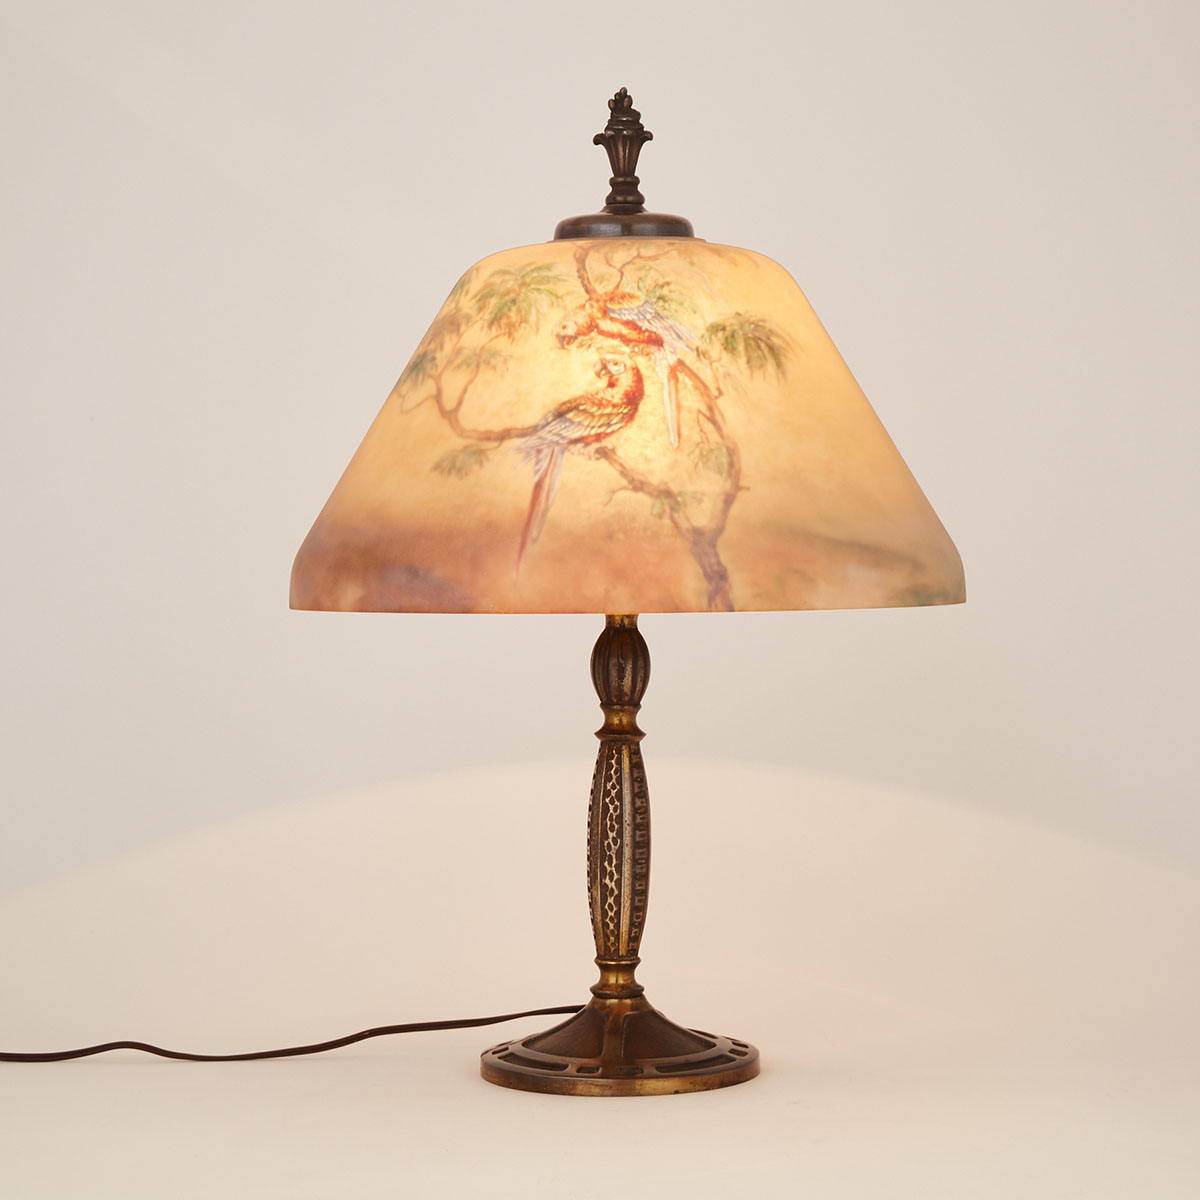 American Reverse Painted Glass Table Lamp, c.1900